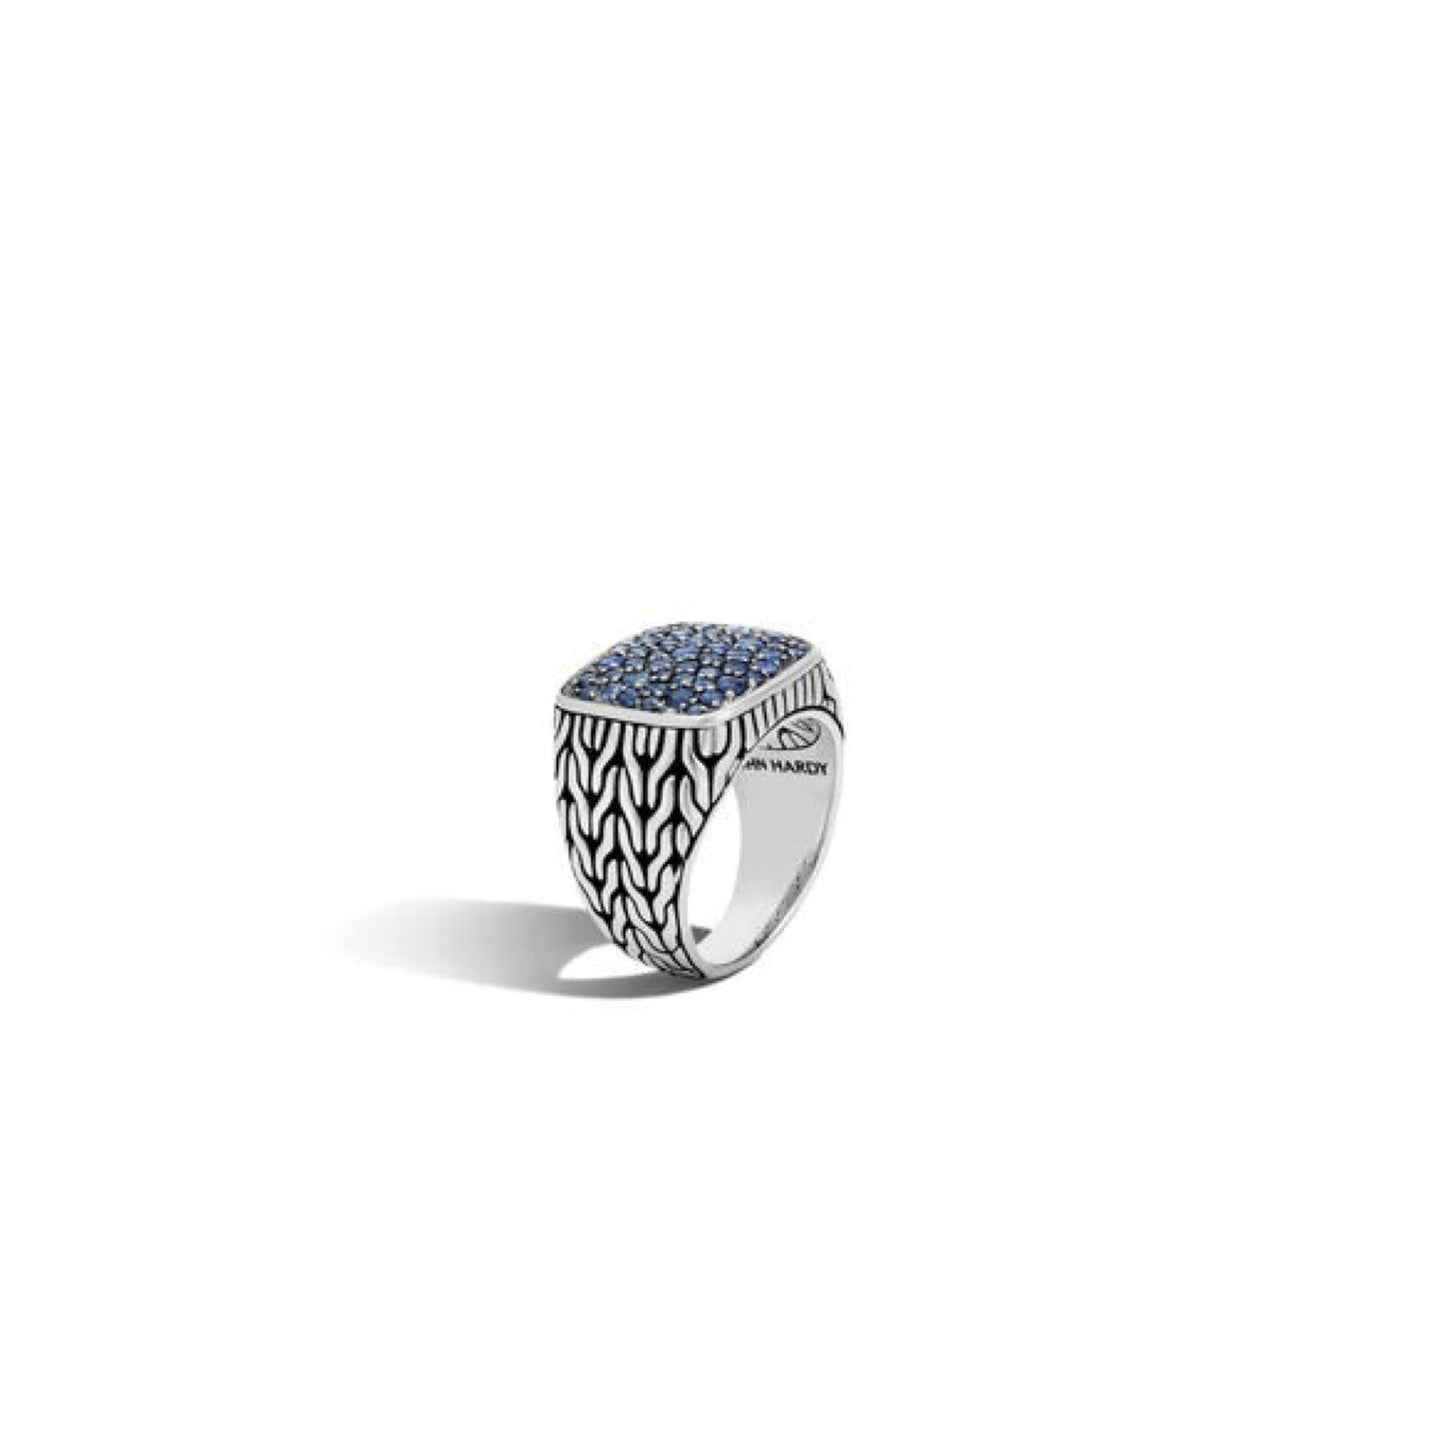 John Hardy Men's Sterling Silver Blue Sapphire Signet Ring, Retail $1550 - SOLD OUT!